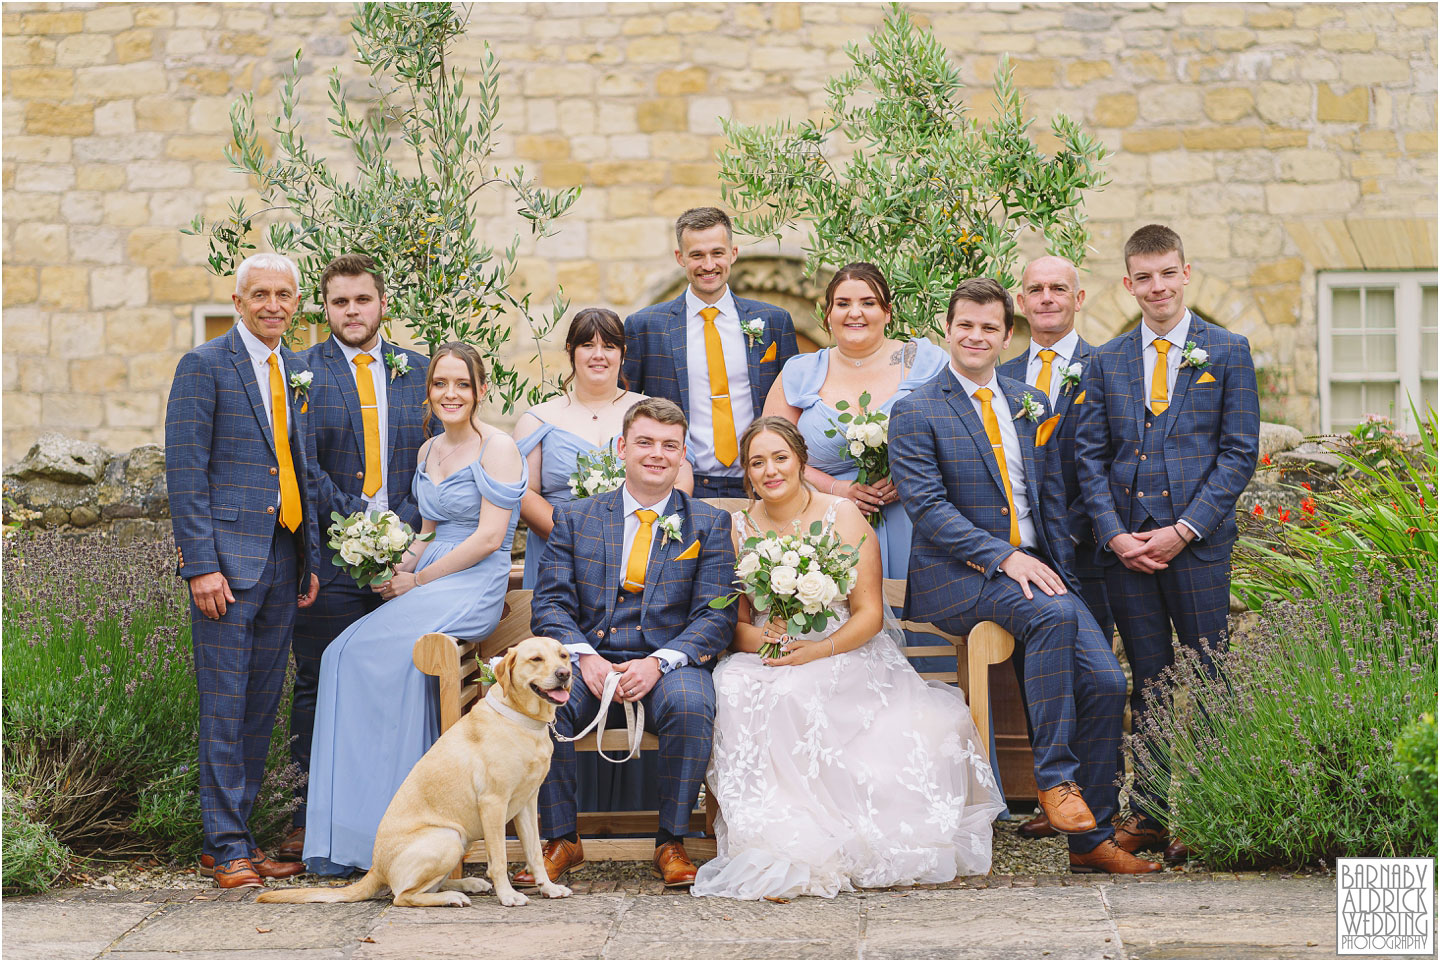 Priory Cottages Wedding Photography Group photos, Confetti at Priory Cottages, Priory Barn Yorkshire Wedding Photographer